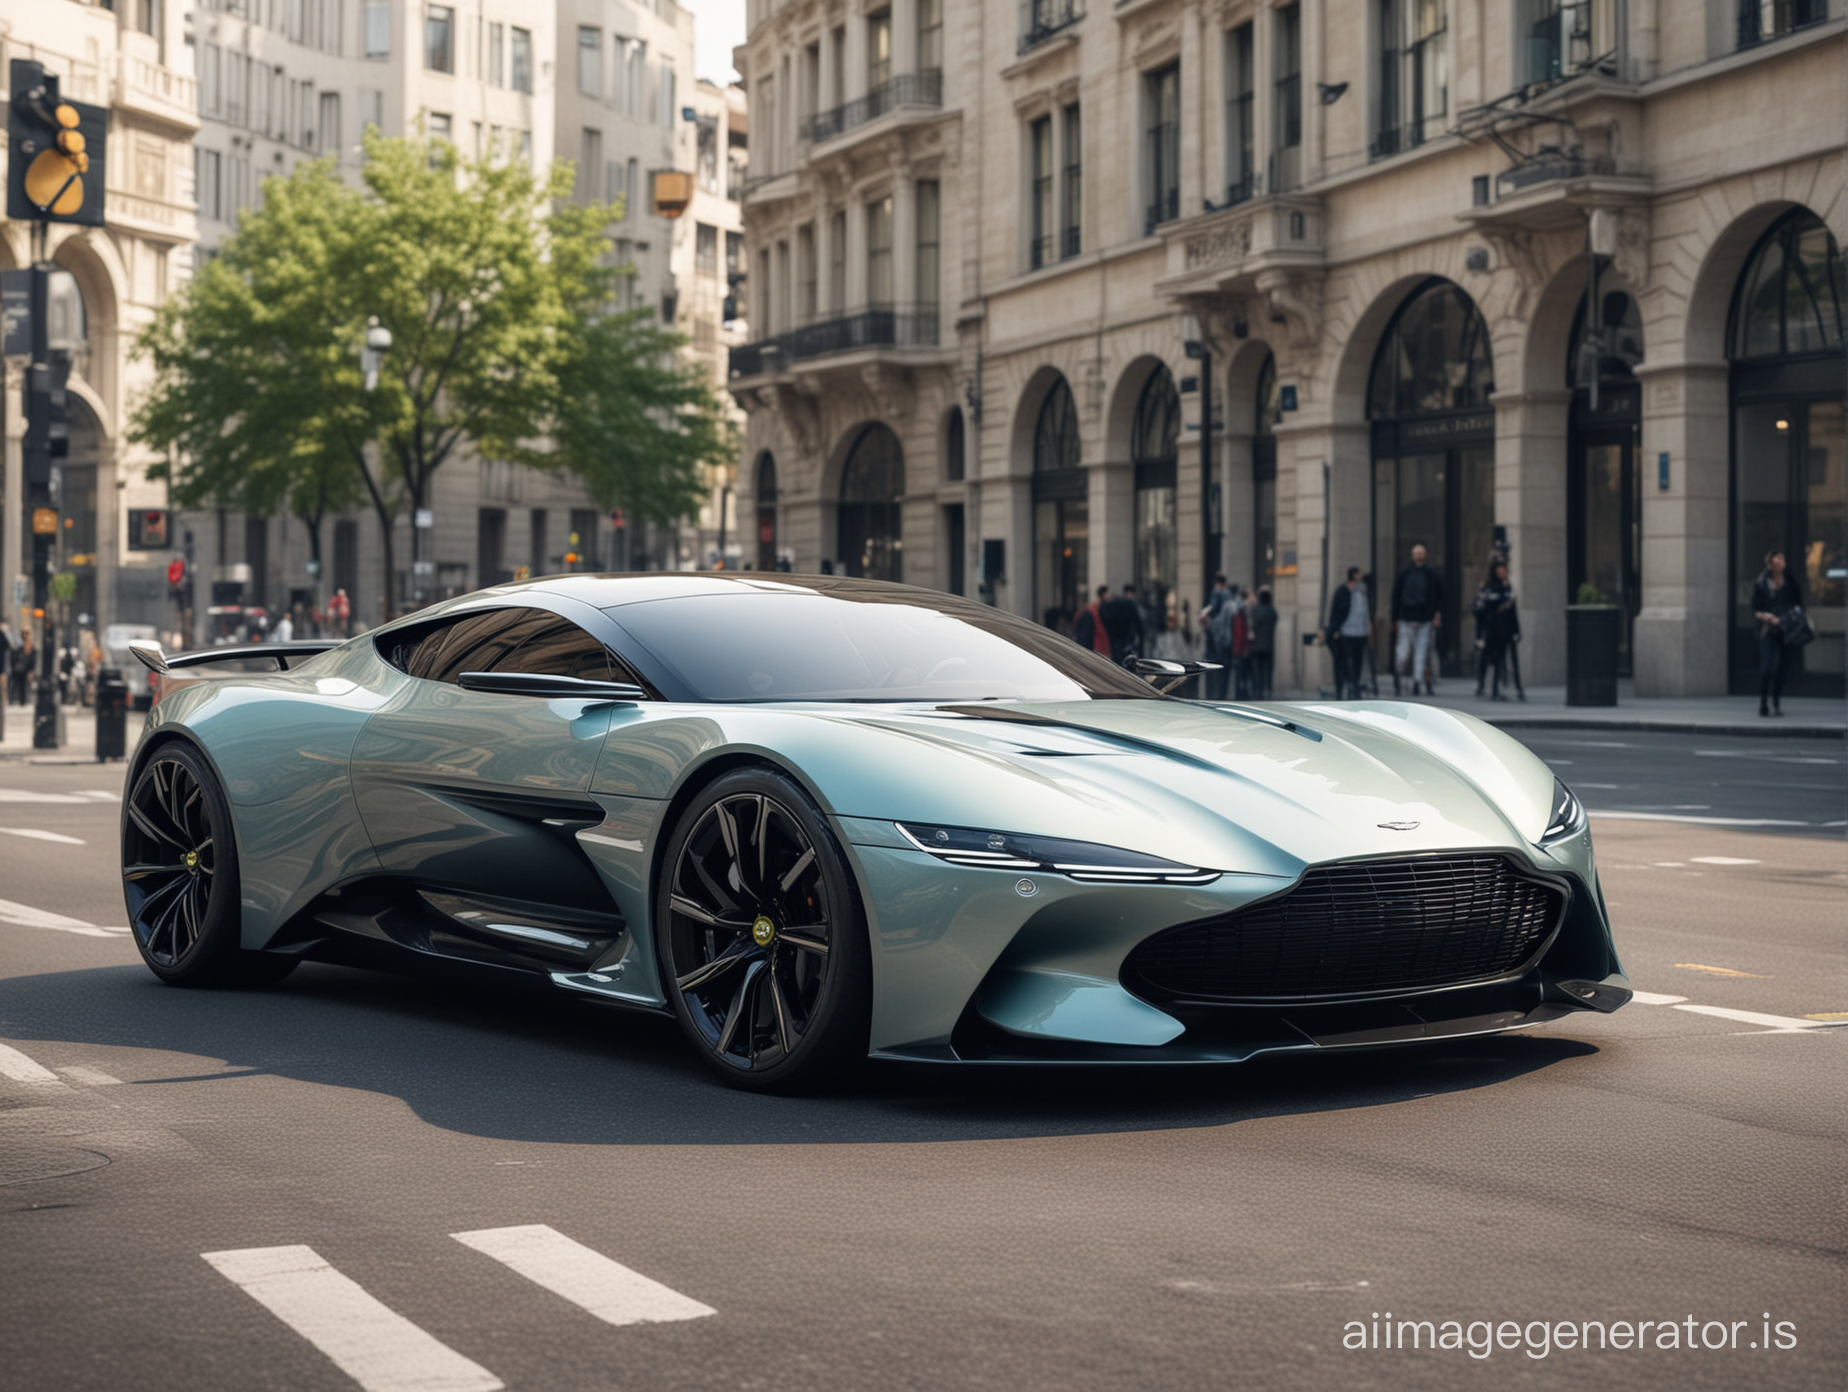 Aston martin in the year 2100, concept car for the year 2100 in modern city at noon